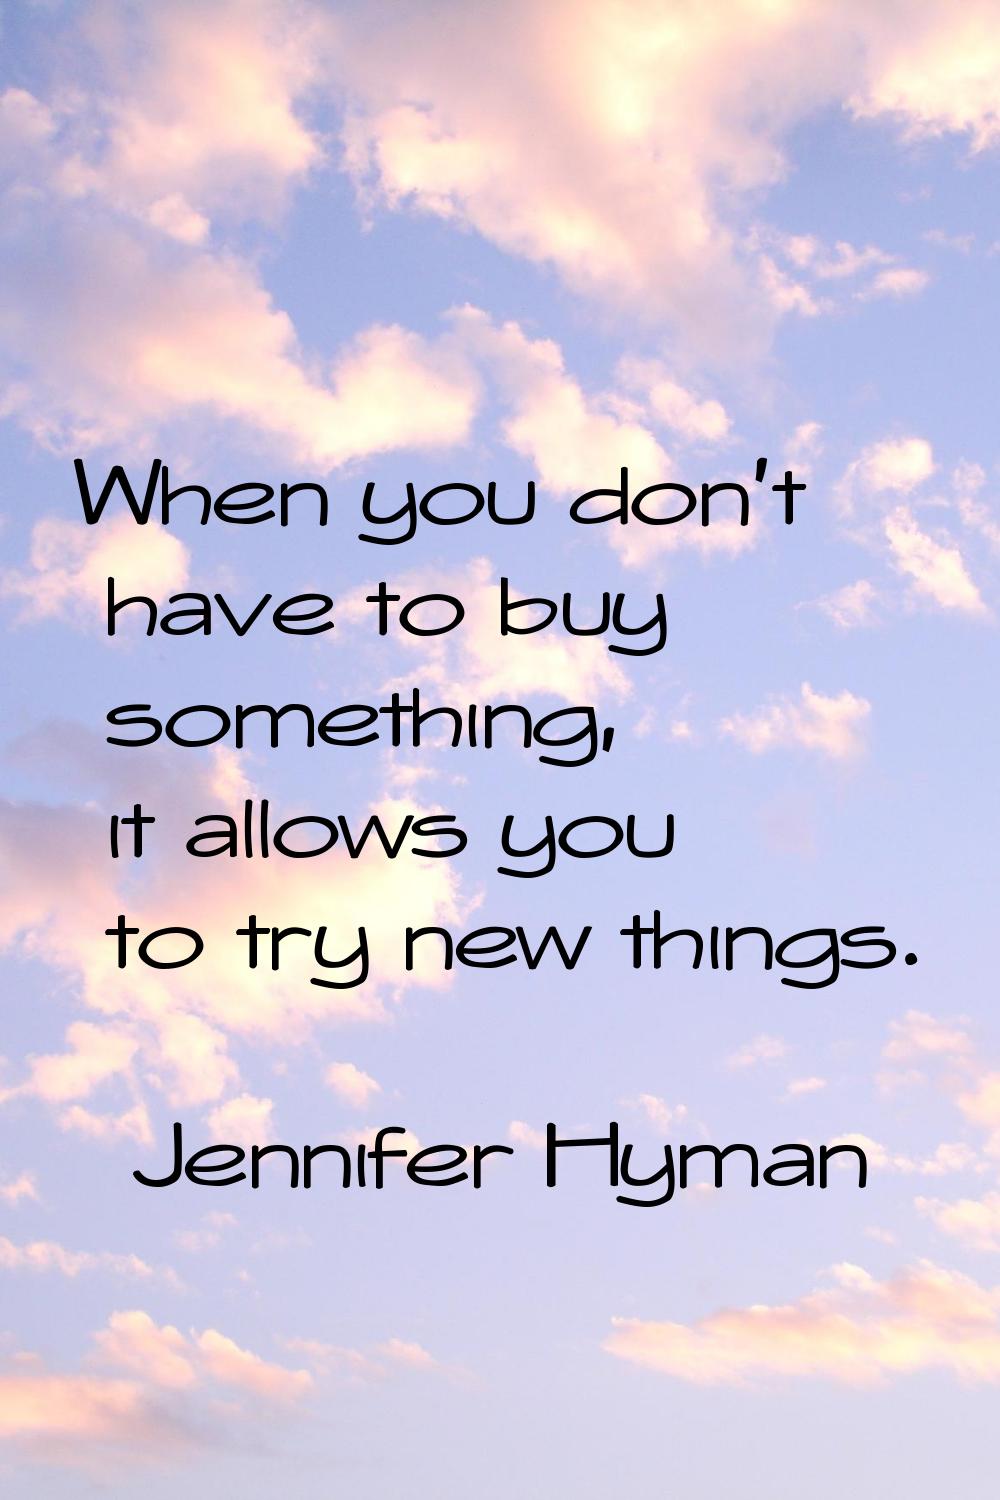 When you don't have to buy something, it allows you to try new things.